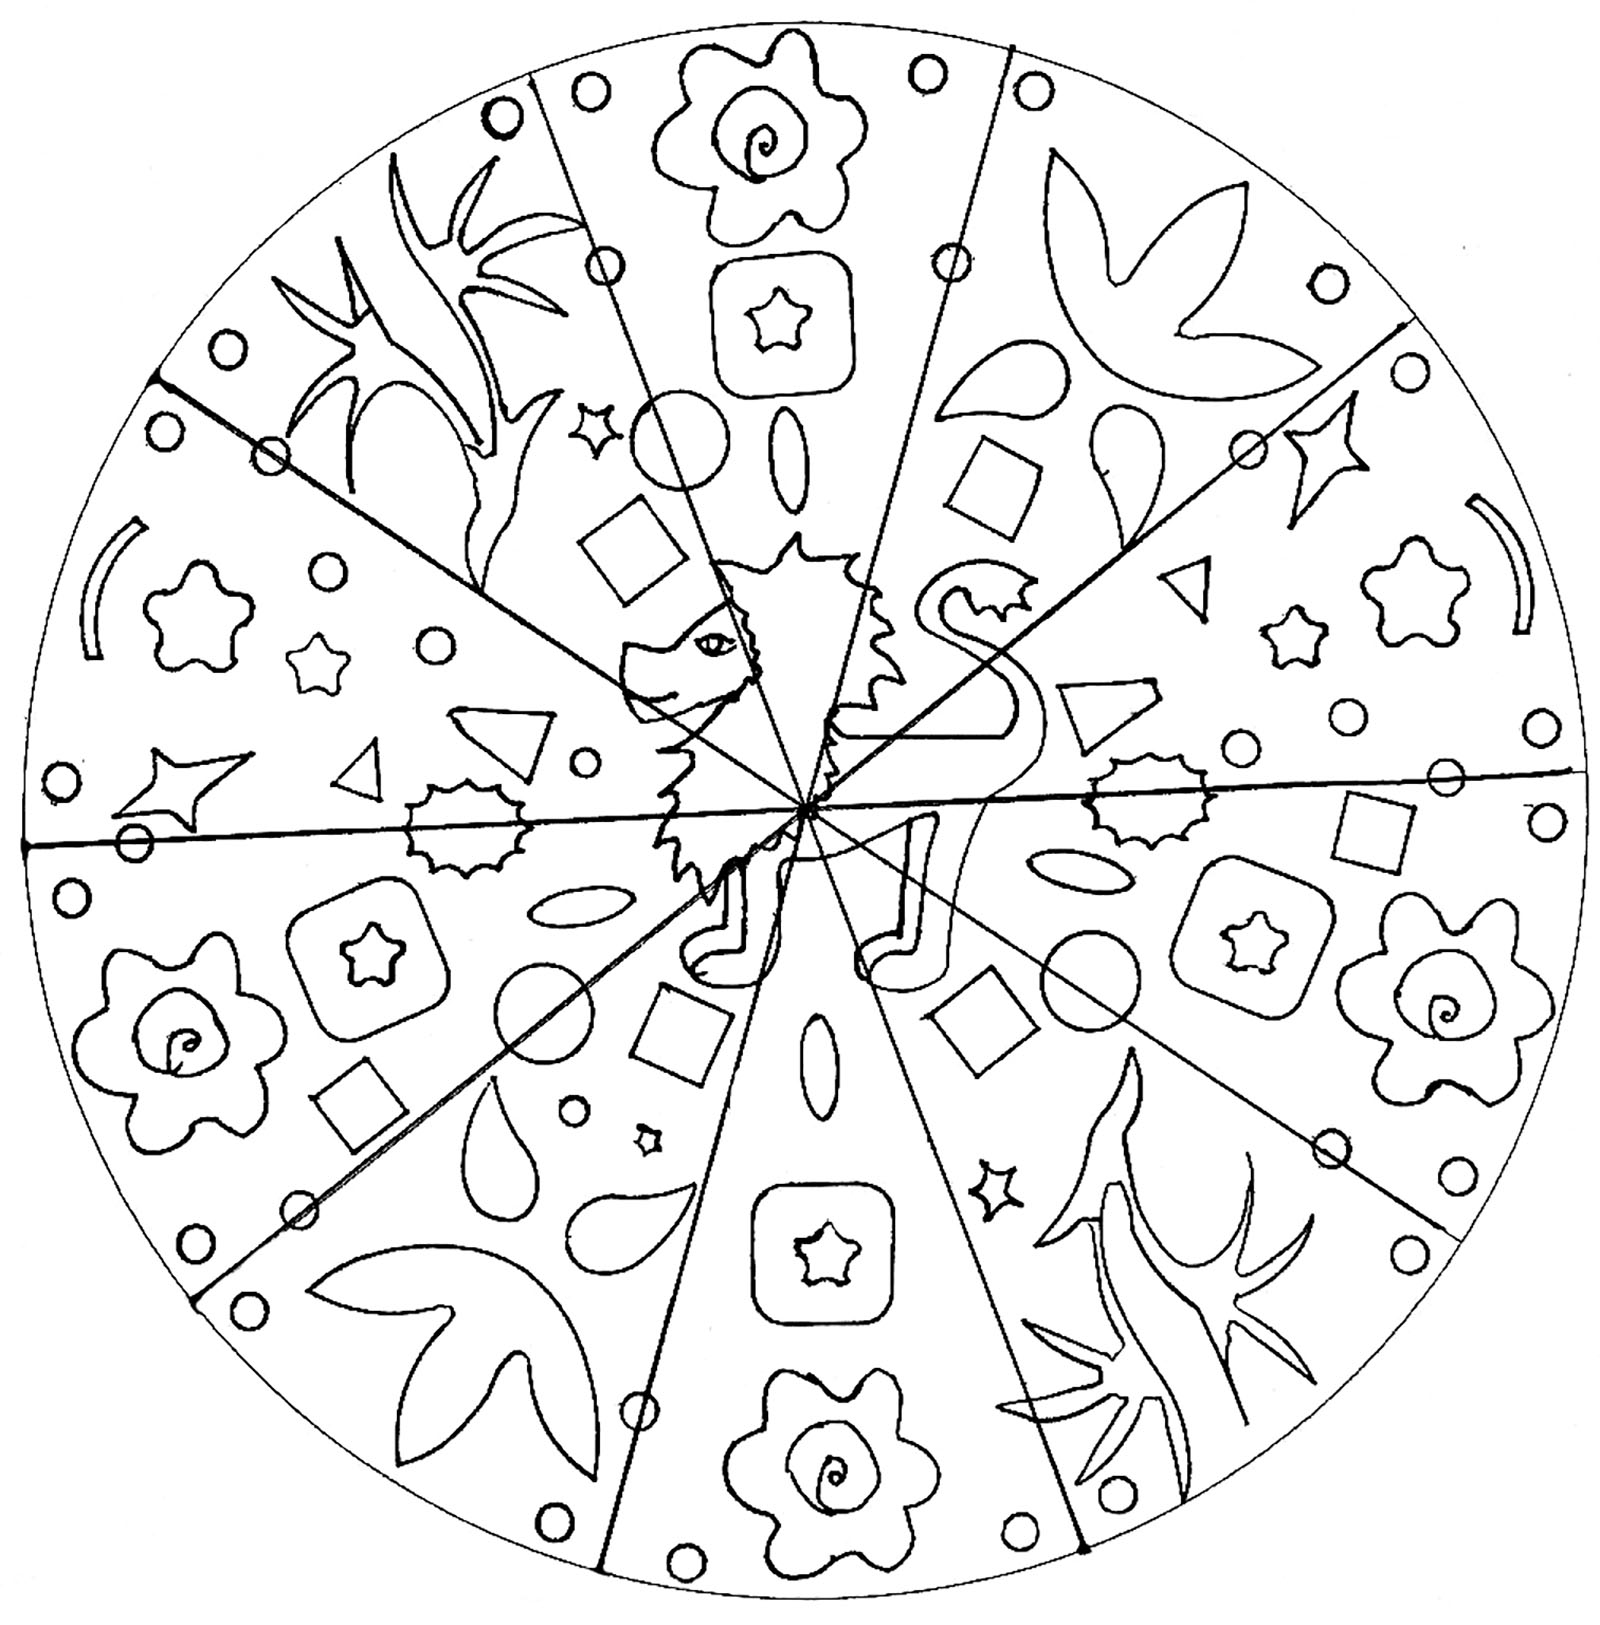 A beautiful Mandala coloring page featuring a lion (hand drawn). It's up to you to choose the most appropriate colors.